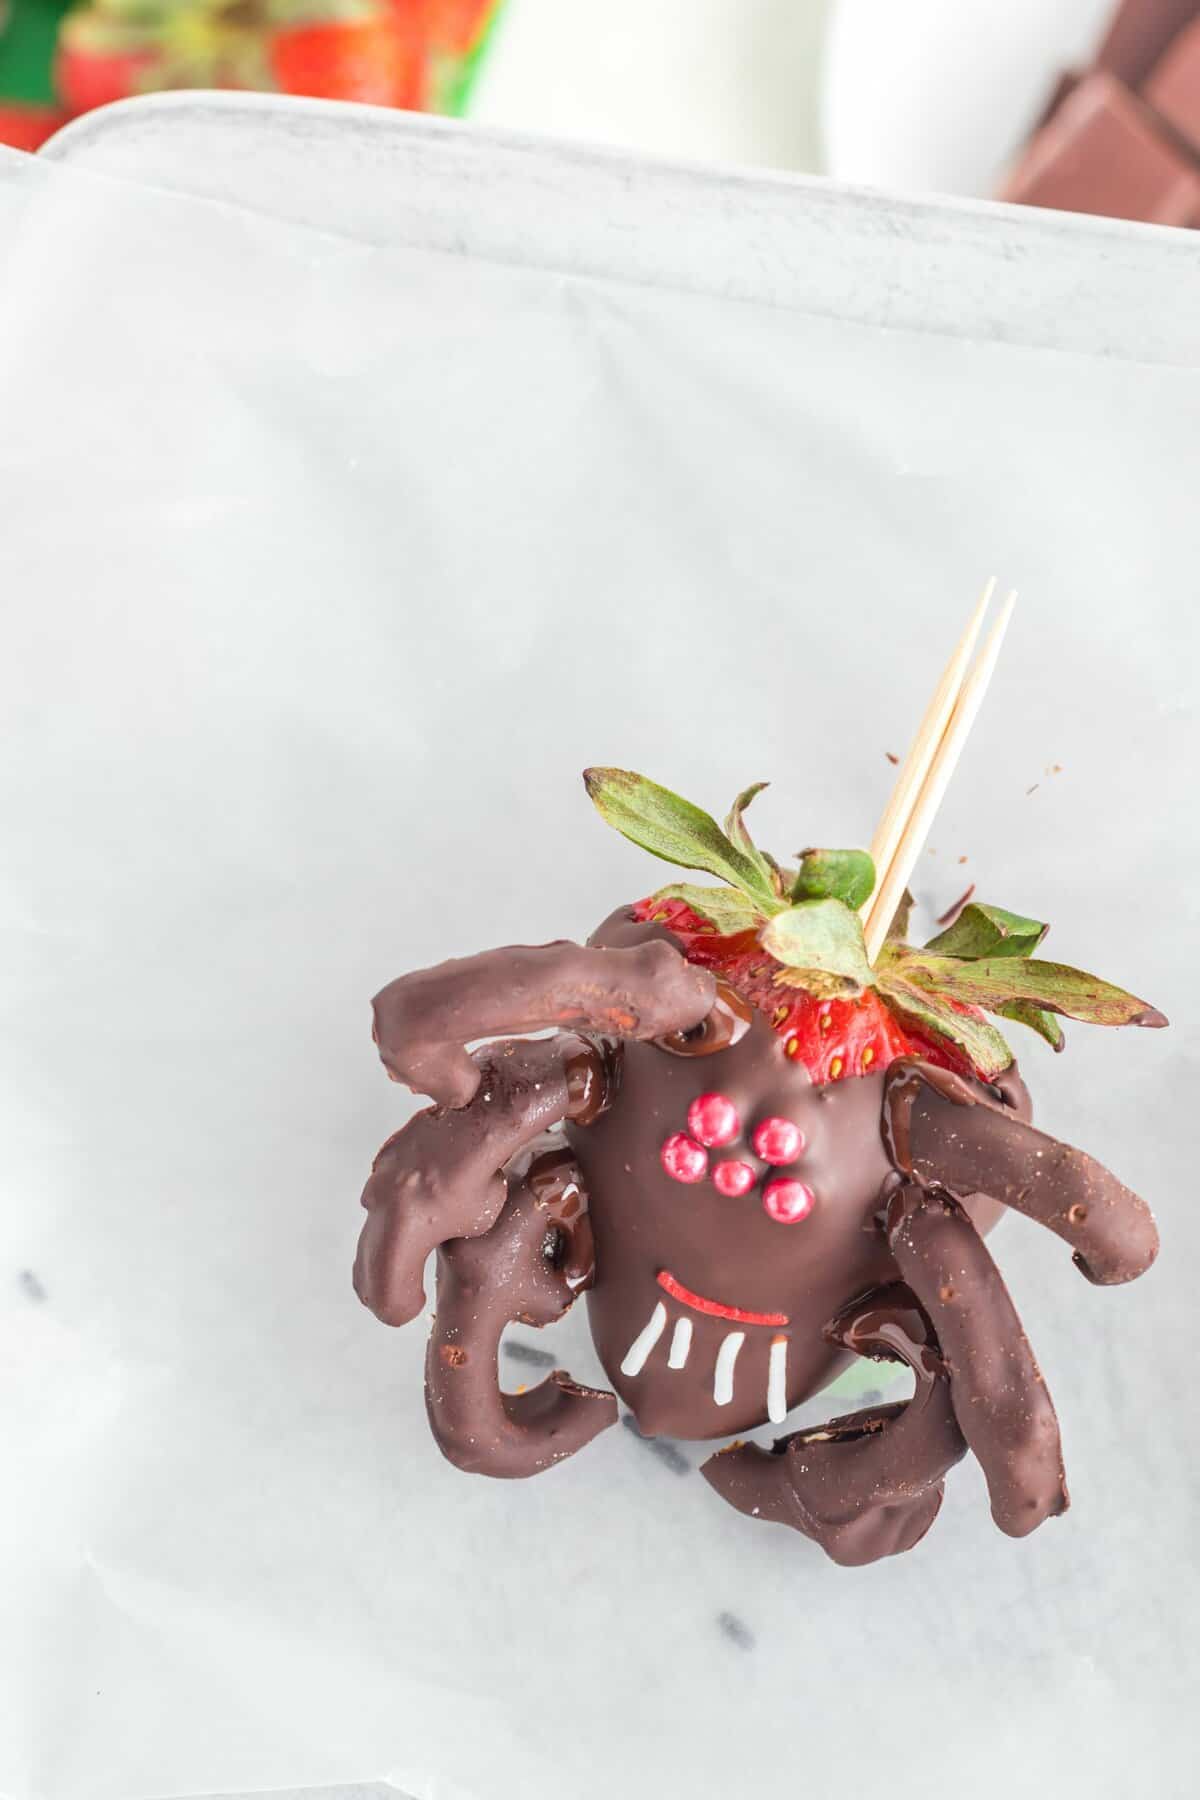 The finished black widow decorated chocolate dipped strawberry on piece of wax paper.